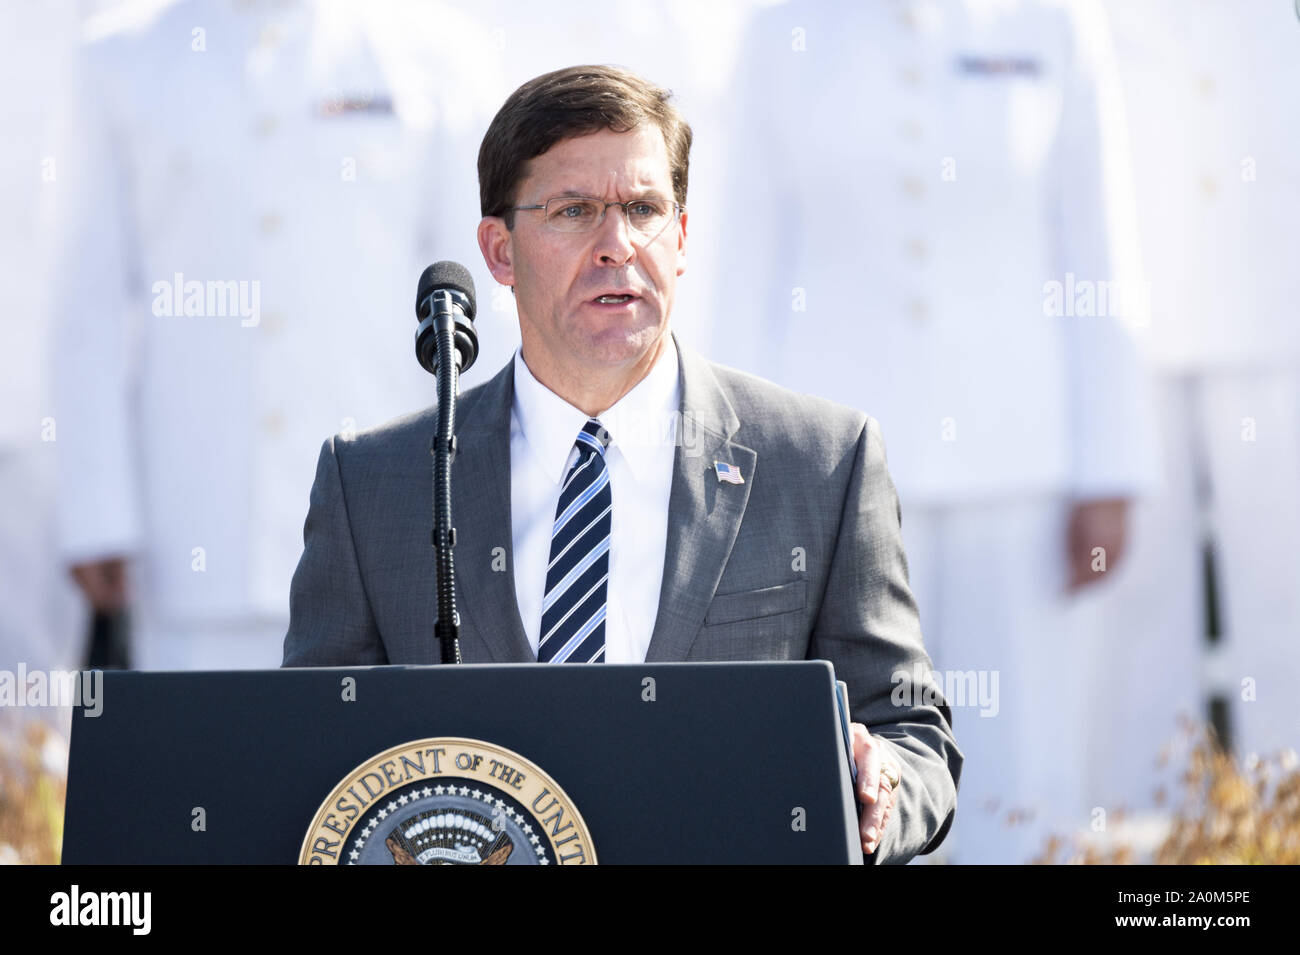 Arlington, Virginia, USA. 11th Sep, 2019. MARK ESPER, United States Secretary of Defense, speaking at the September 11th Memorial Observance Ceremony at the Pentagon. Credit: Michael Brochstein/ZUMA Wire/Alamy Live News Stock Photo